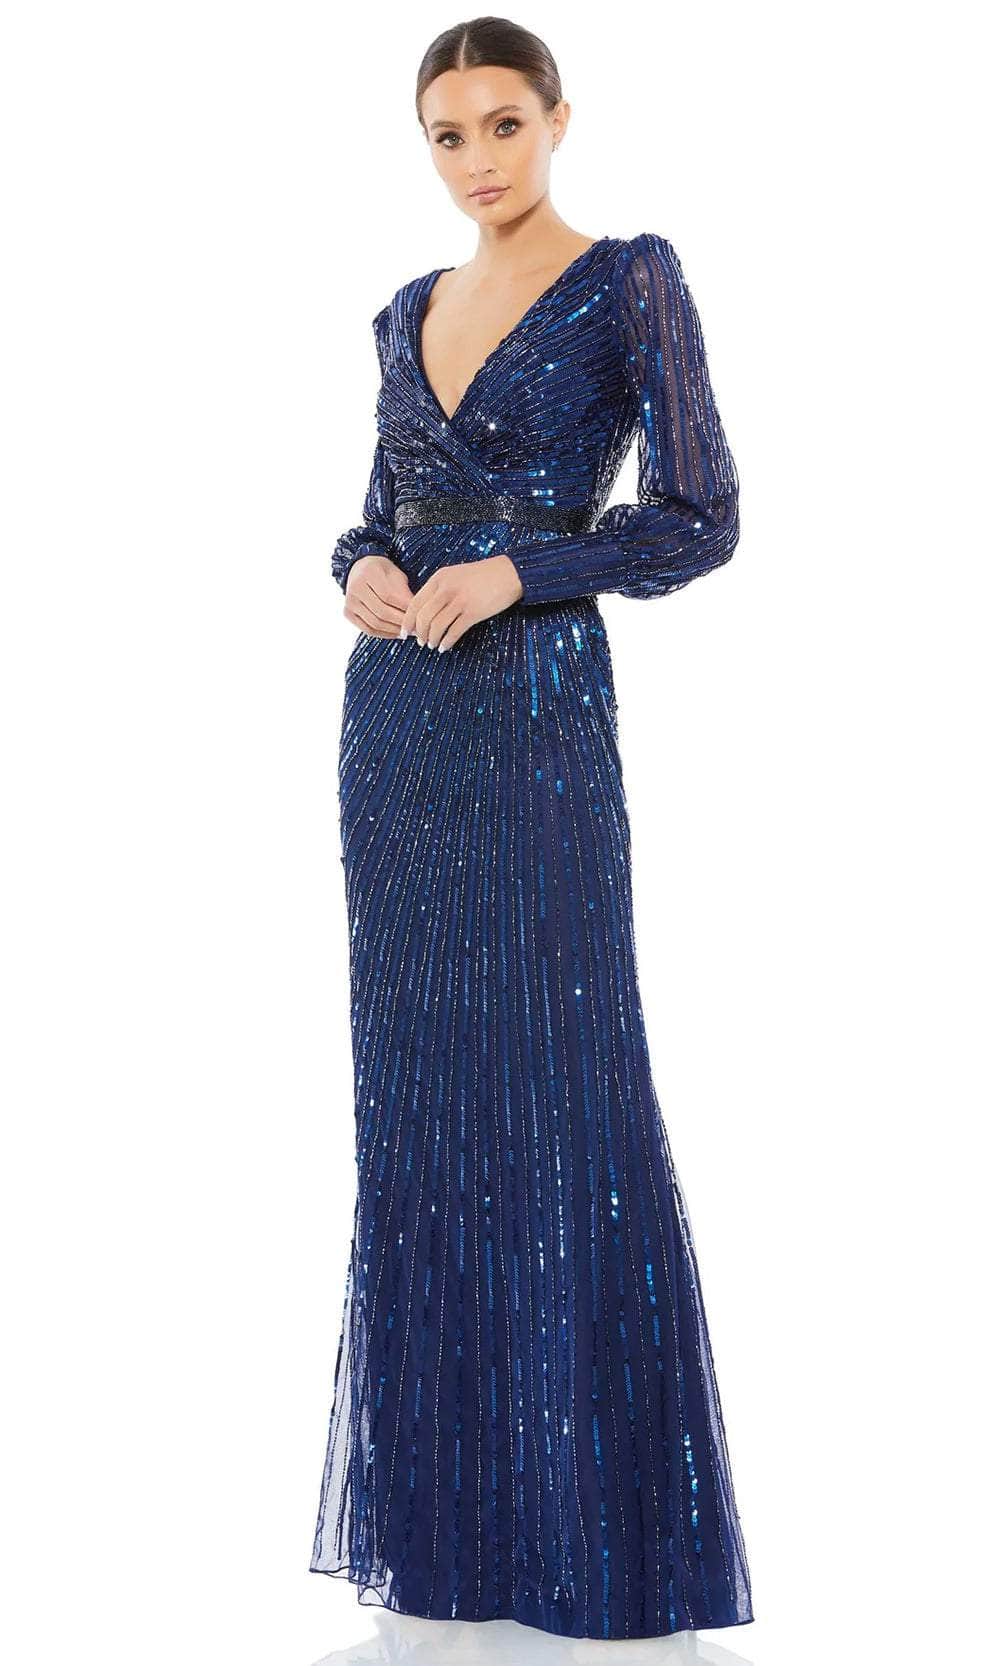 Image of Mac Duggal 5501 - Long Sleeve Sequin Evening Gown